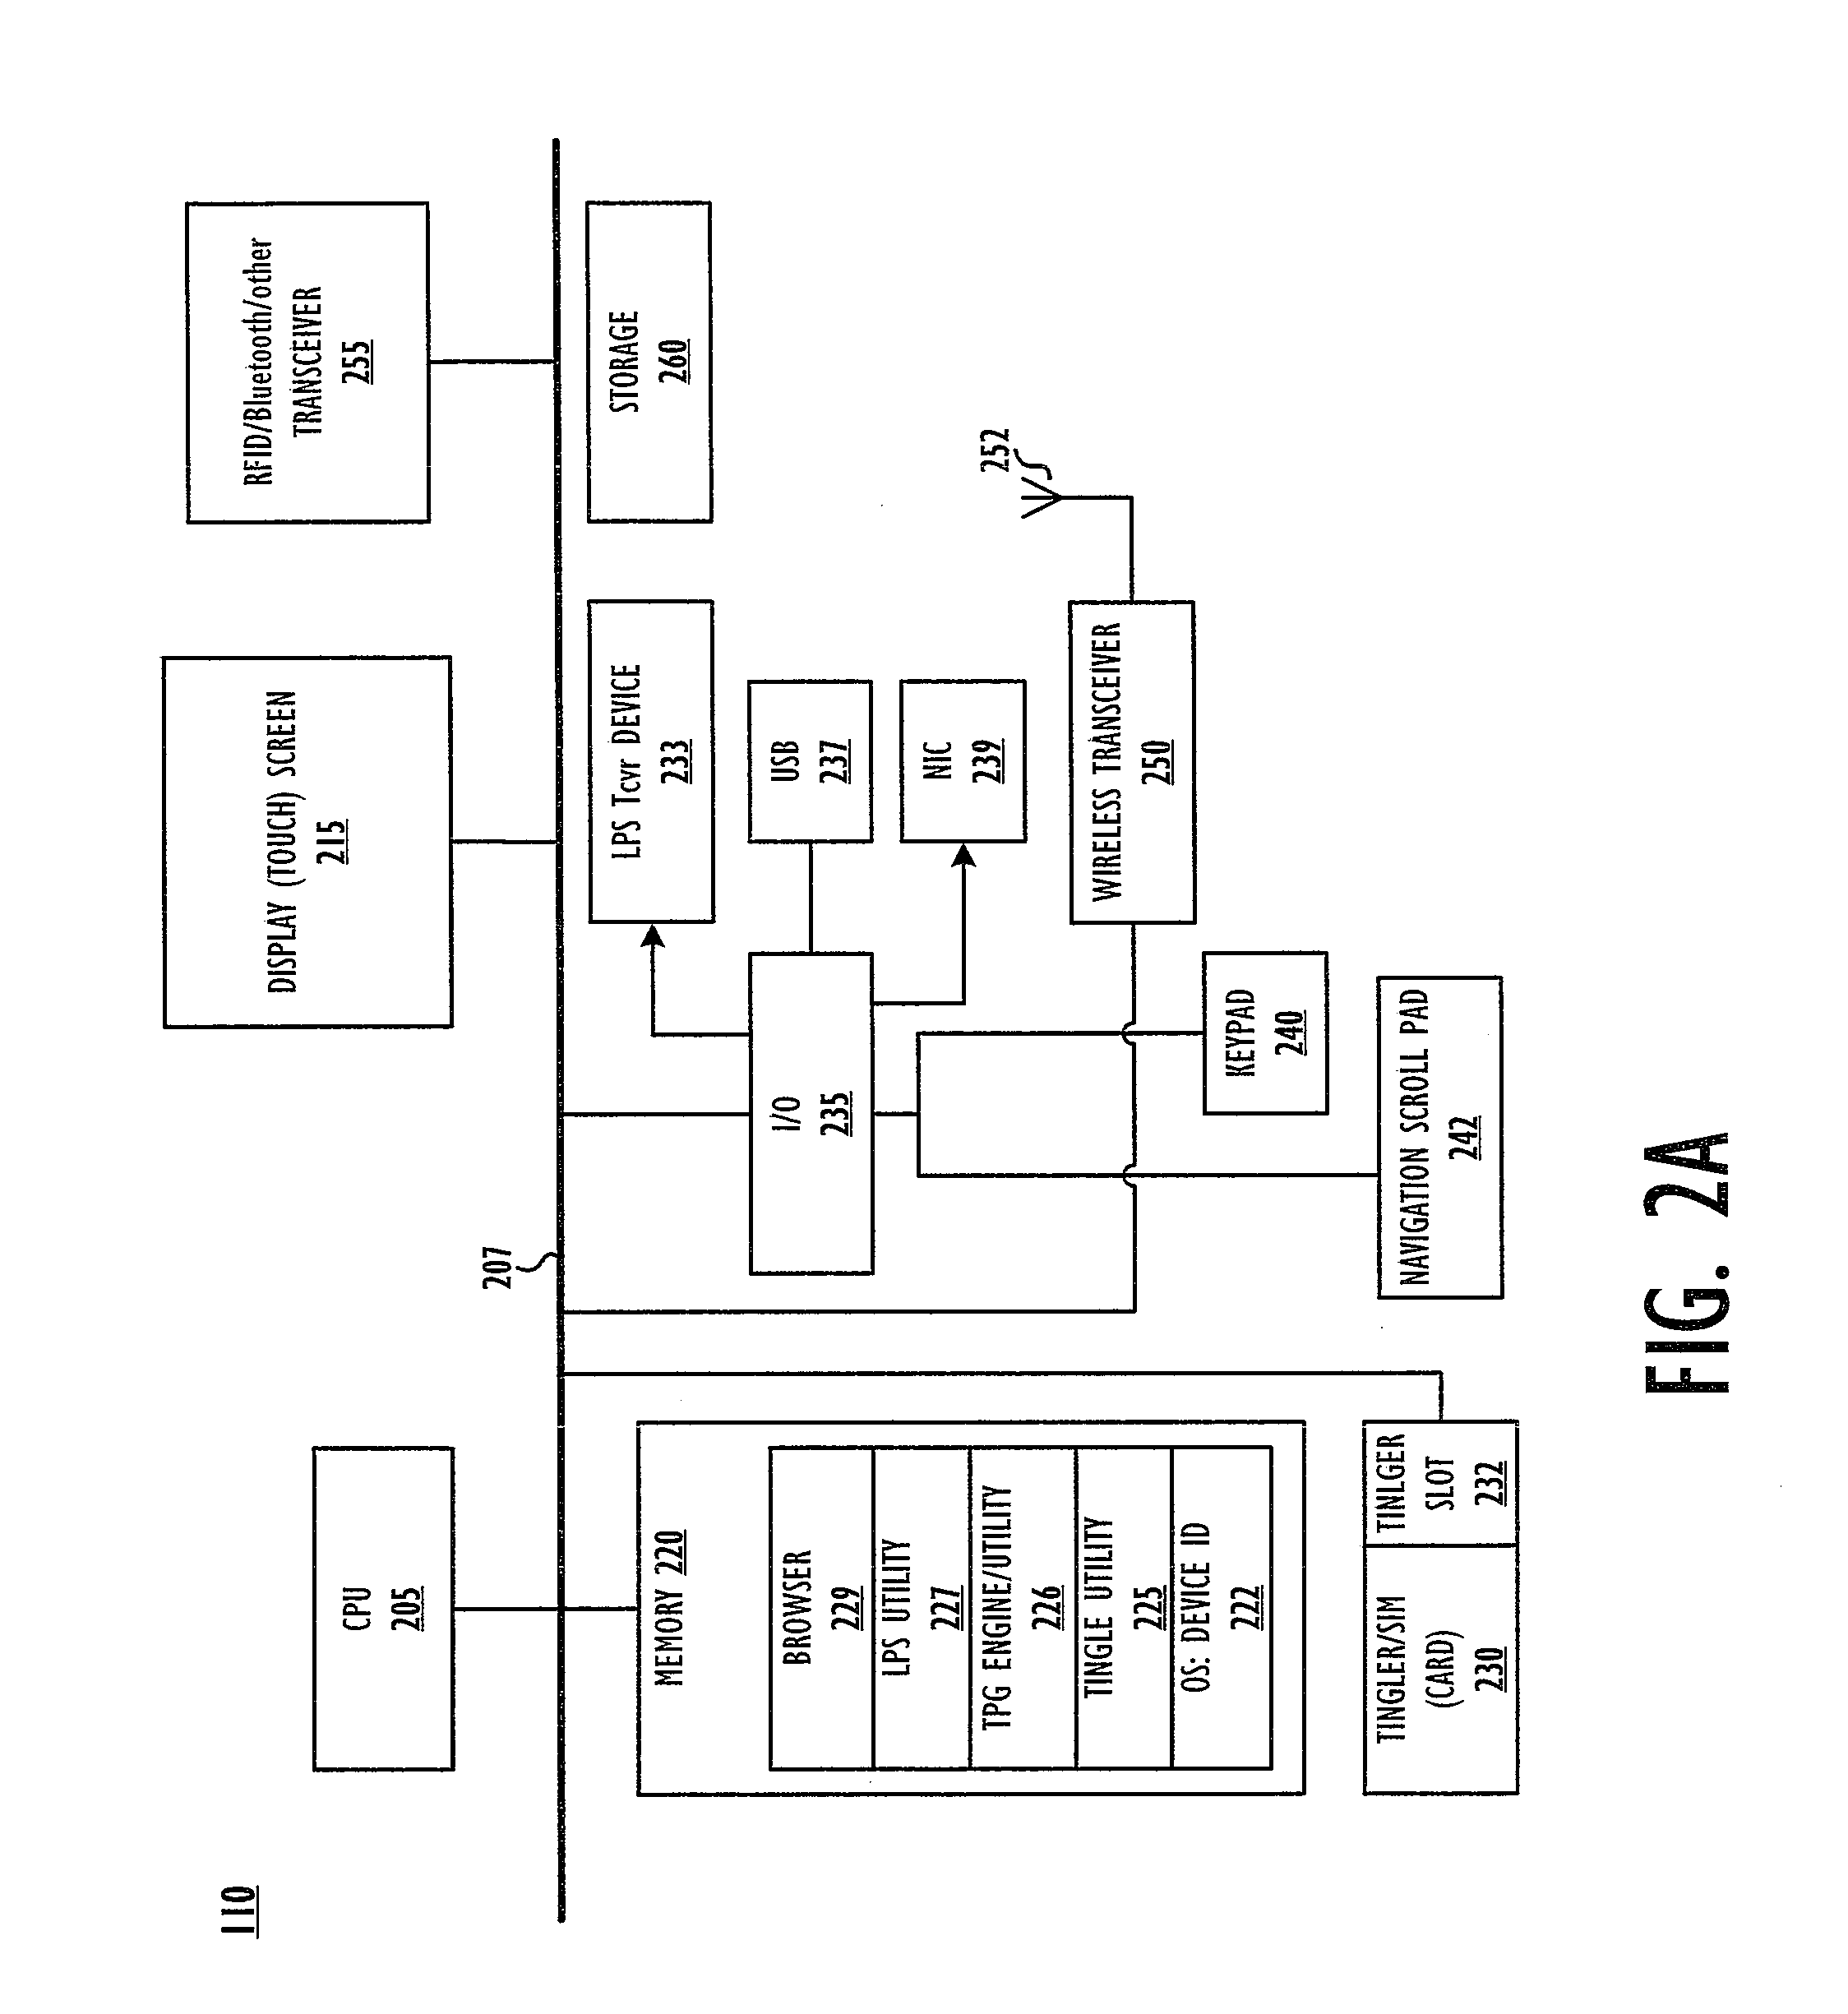 Method, system, and devices for facilitating real-time social and business interractions/networking